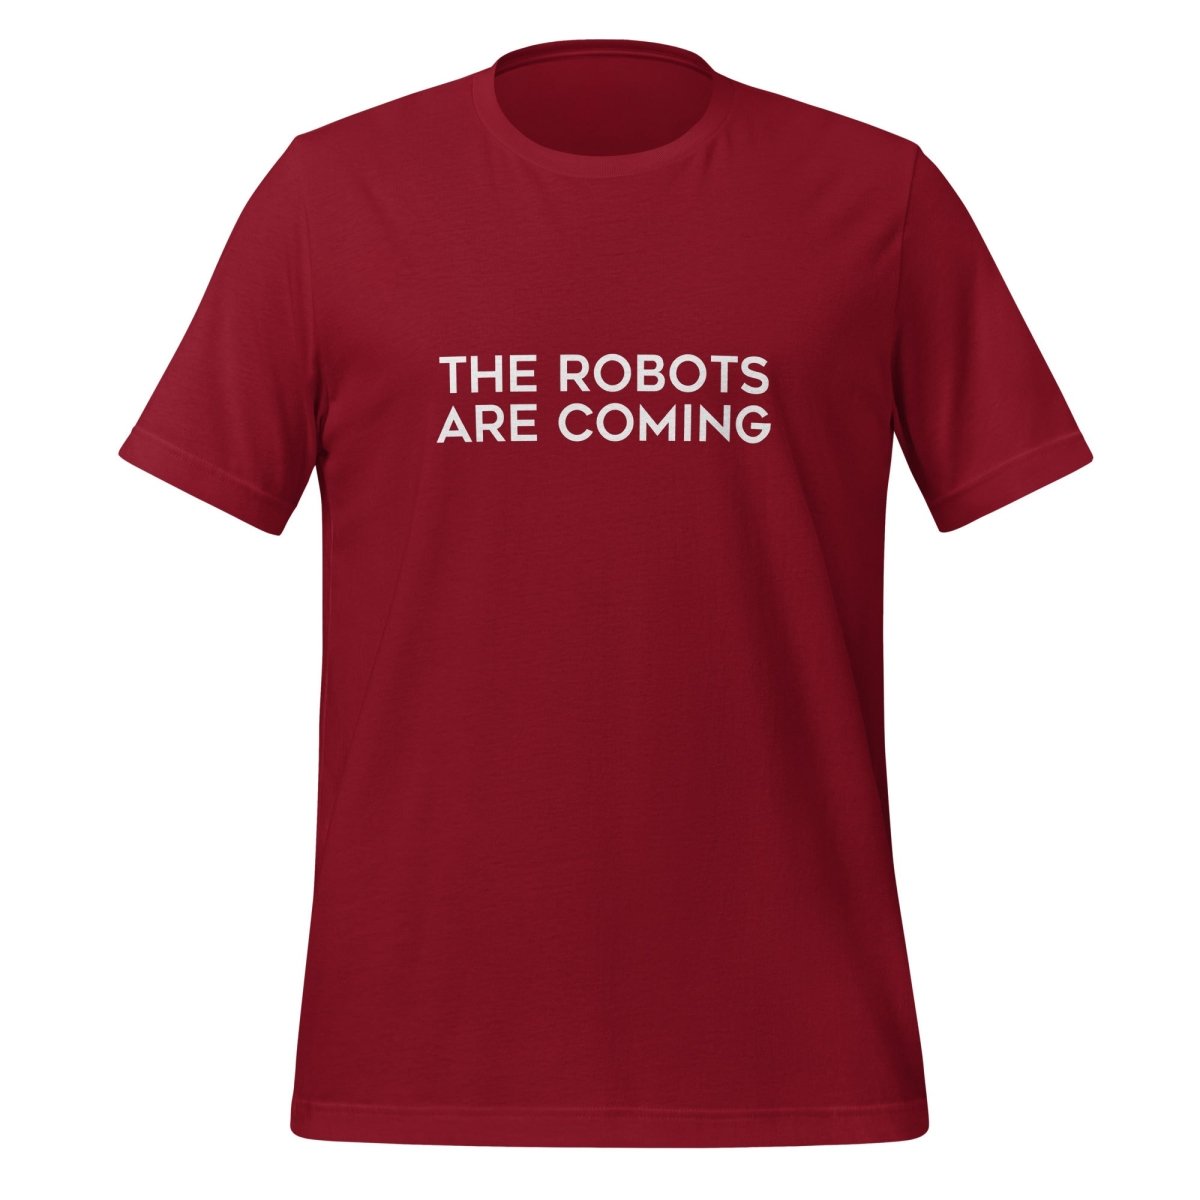 The Robots Are Coming T - Shirt 1 (unisex) - Cardinal - AI Store